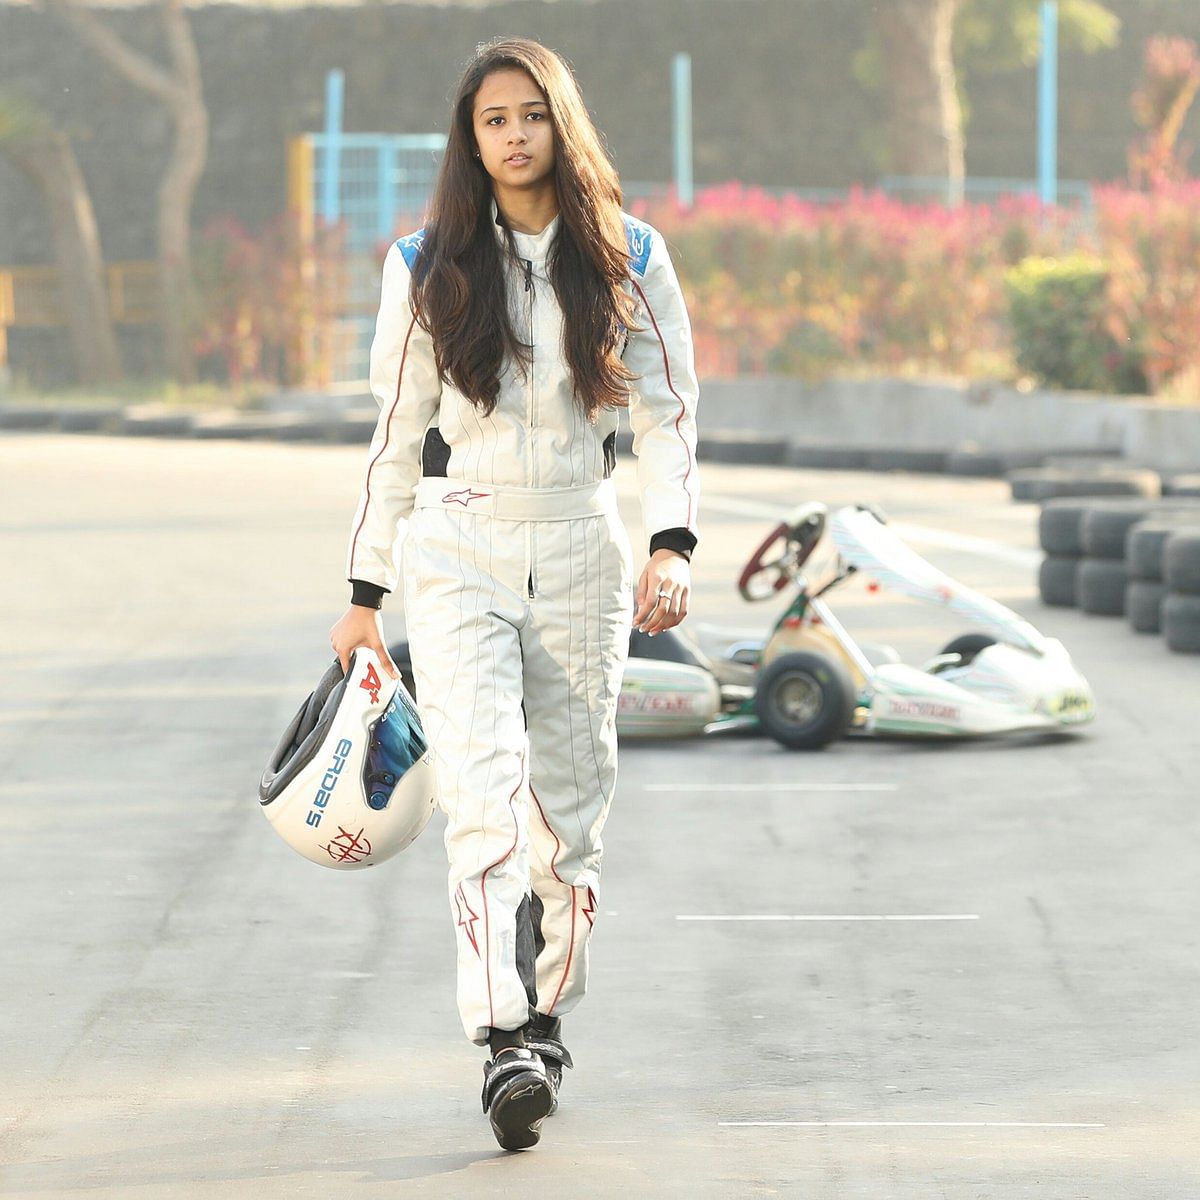 

The 16-year-old will become the first Indian female driver to compete in the series.